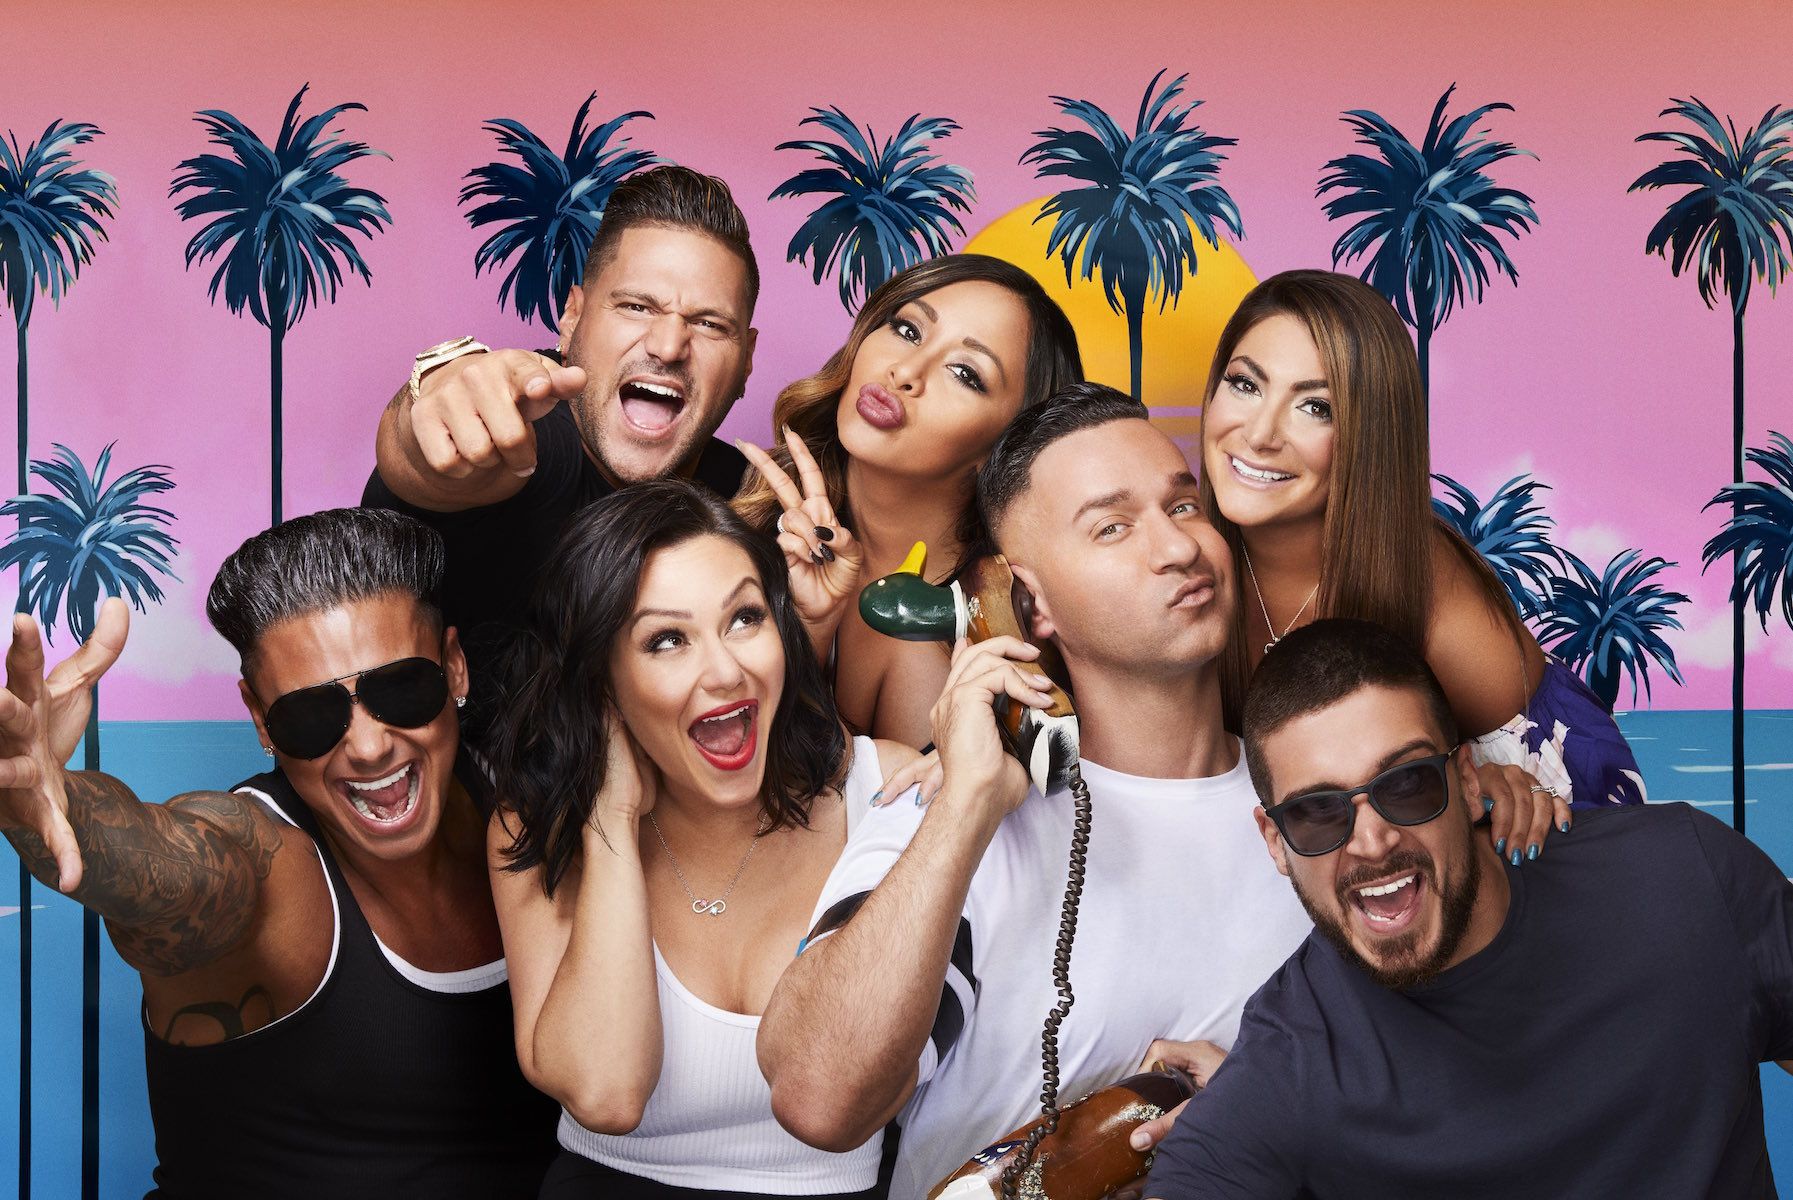 Additief Dicteren Simuleren Jersey Shore: Family Vacation' (1/7/21) free live stream: How to watch  online without cable - nj.com